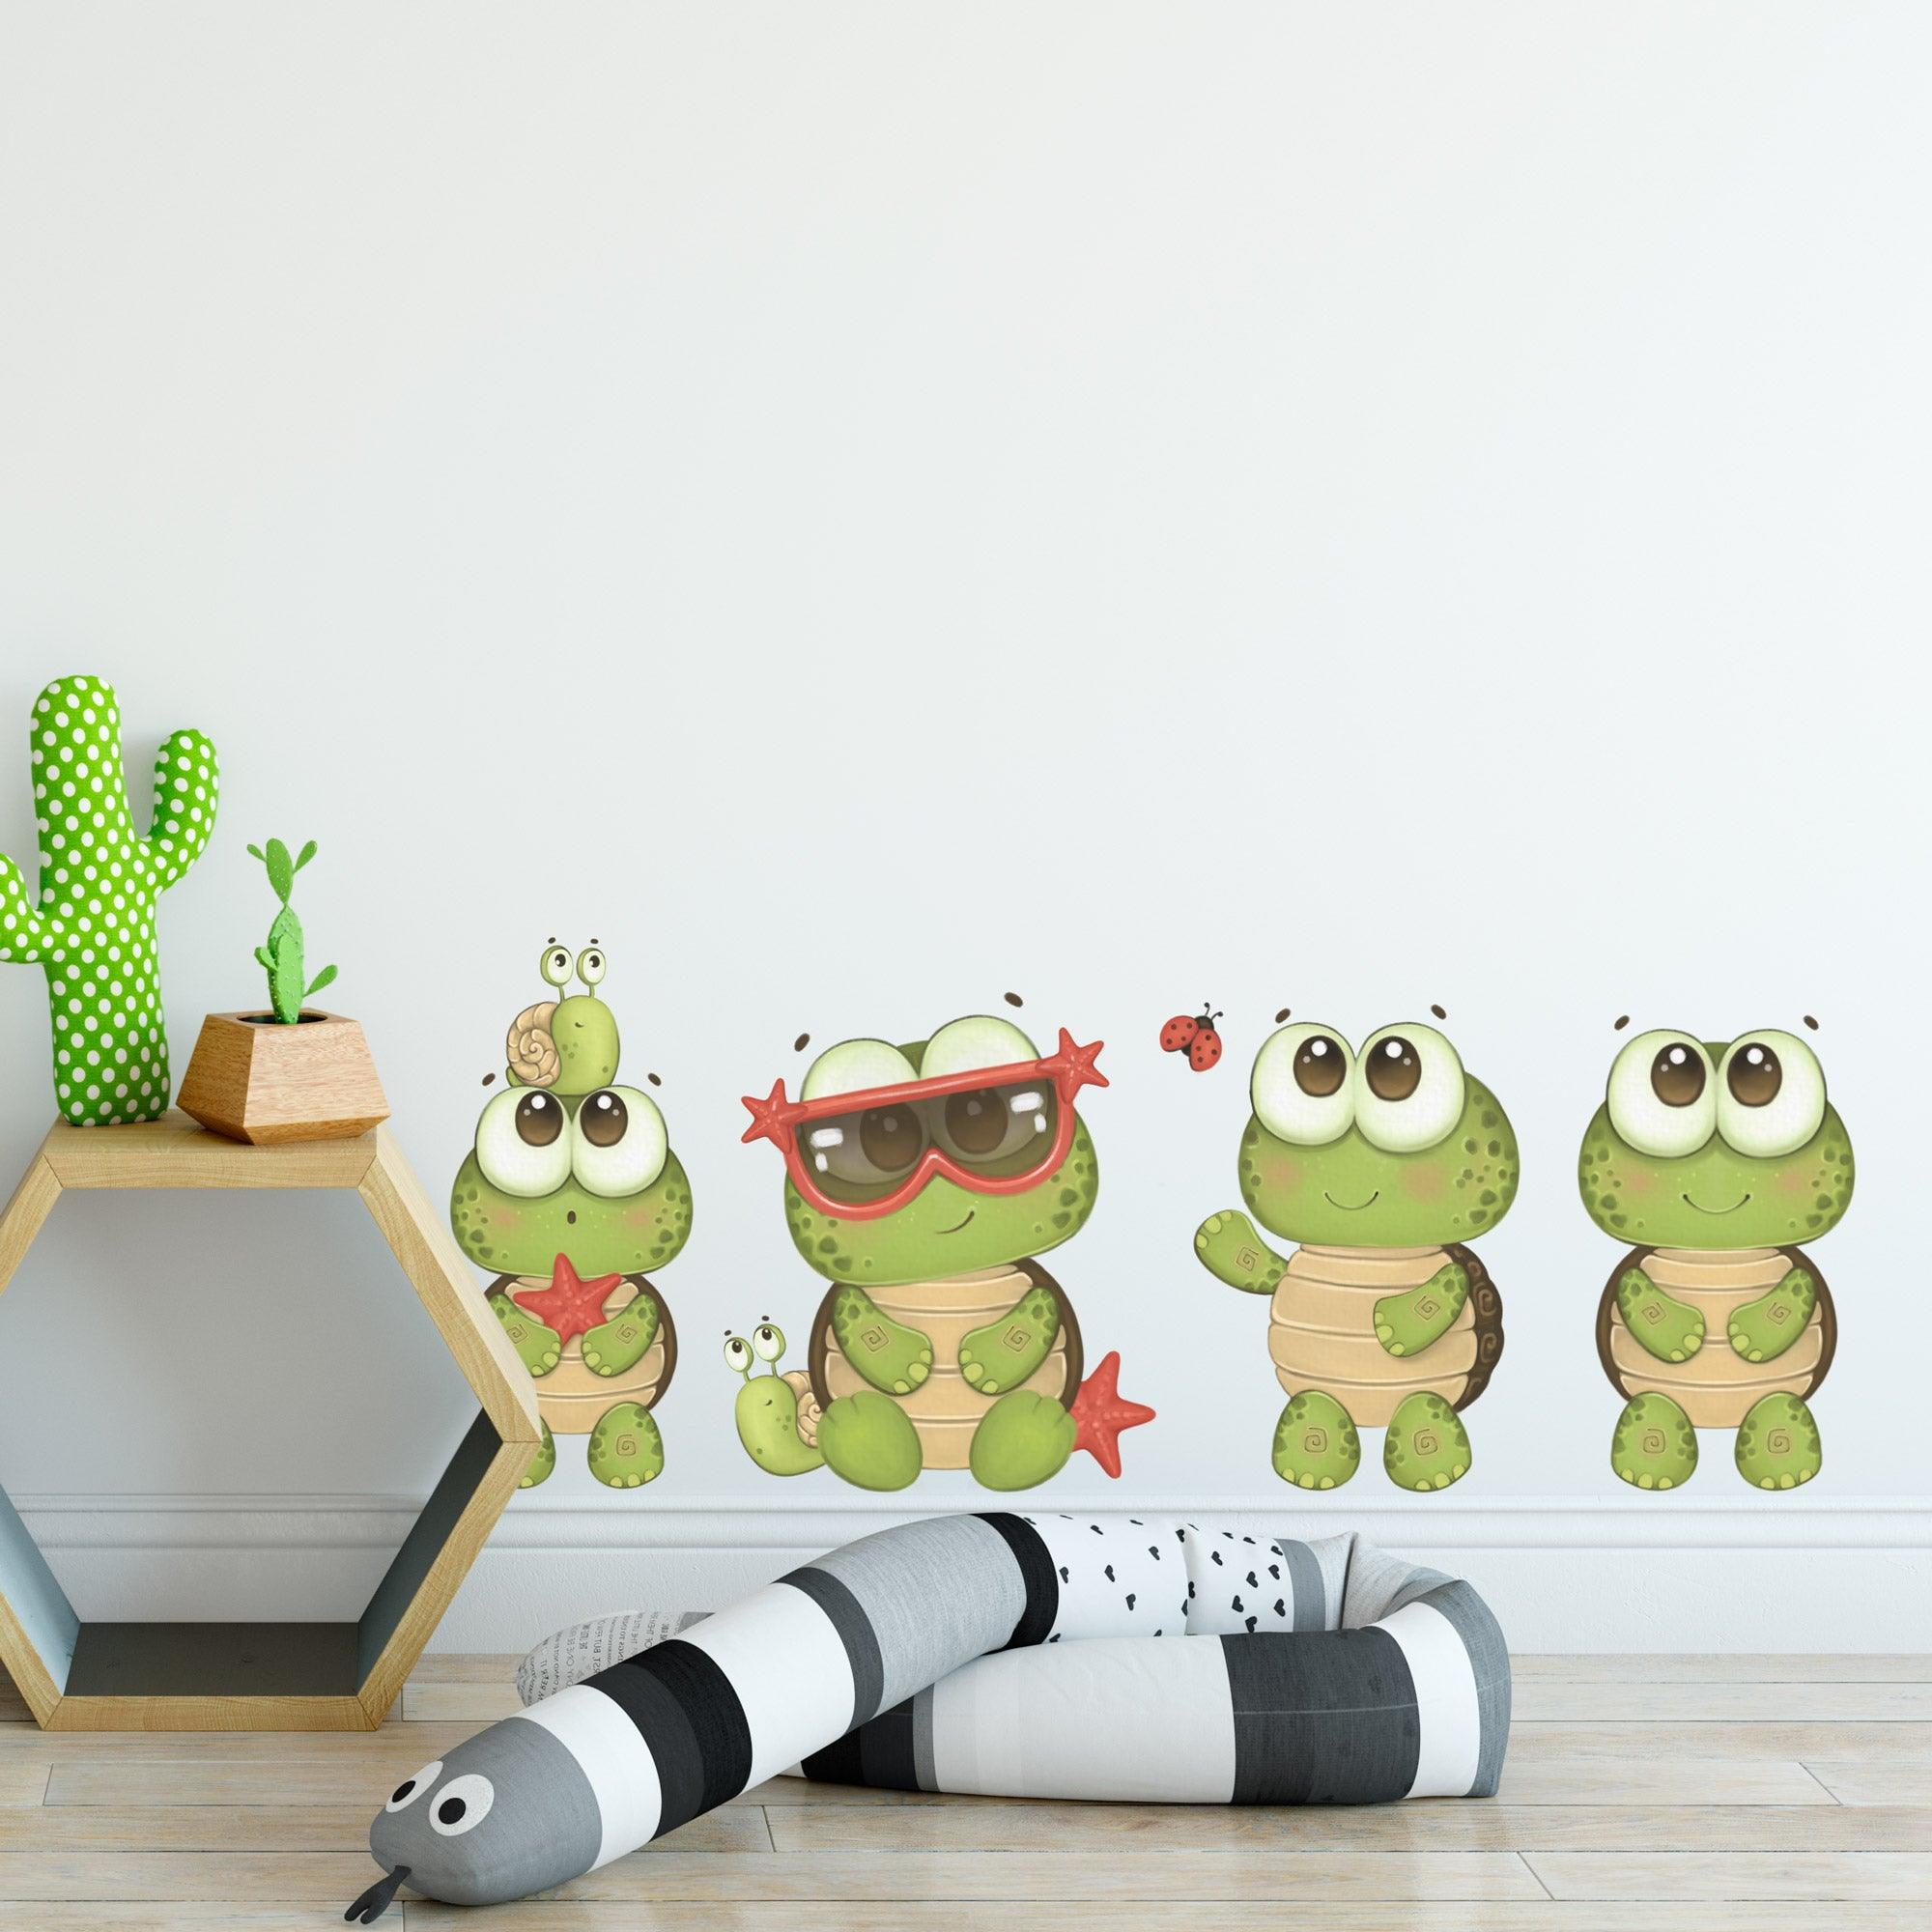 Curious Baby Turtles Wall Decal Set - Printibly